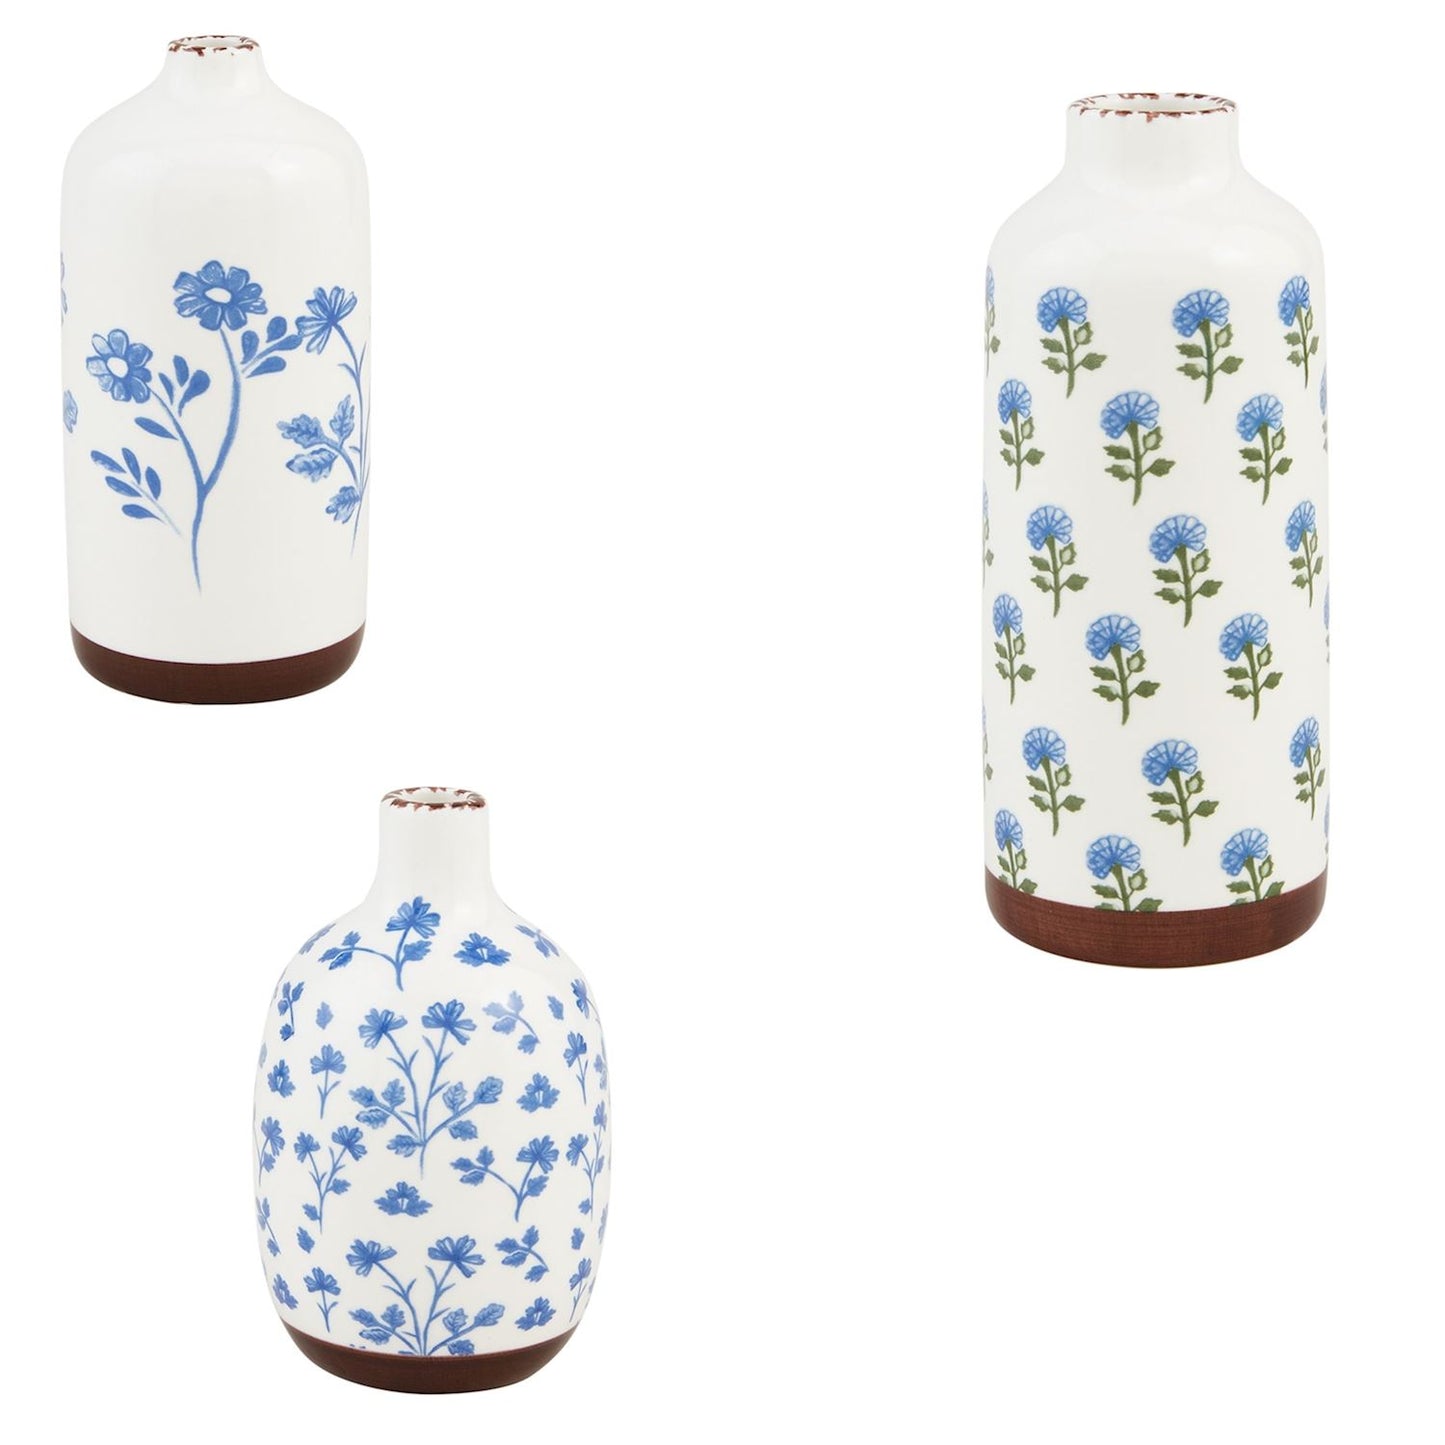 3 sizes and style of blue floral vases on a white background.